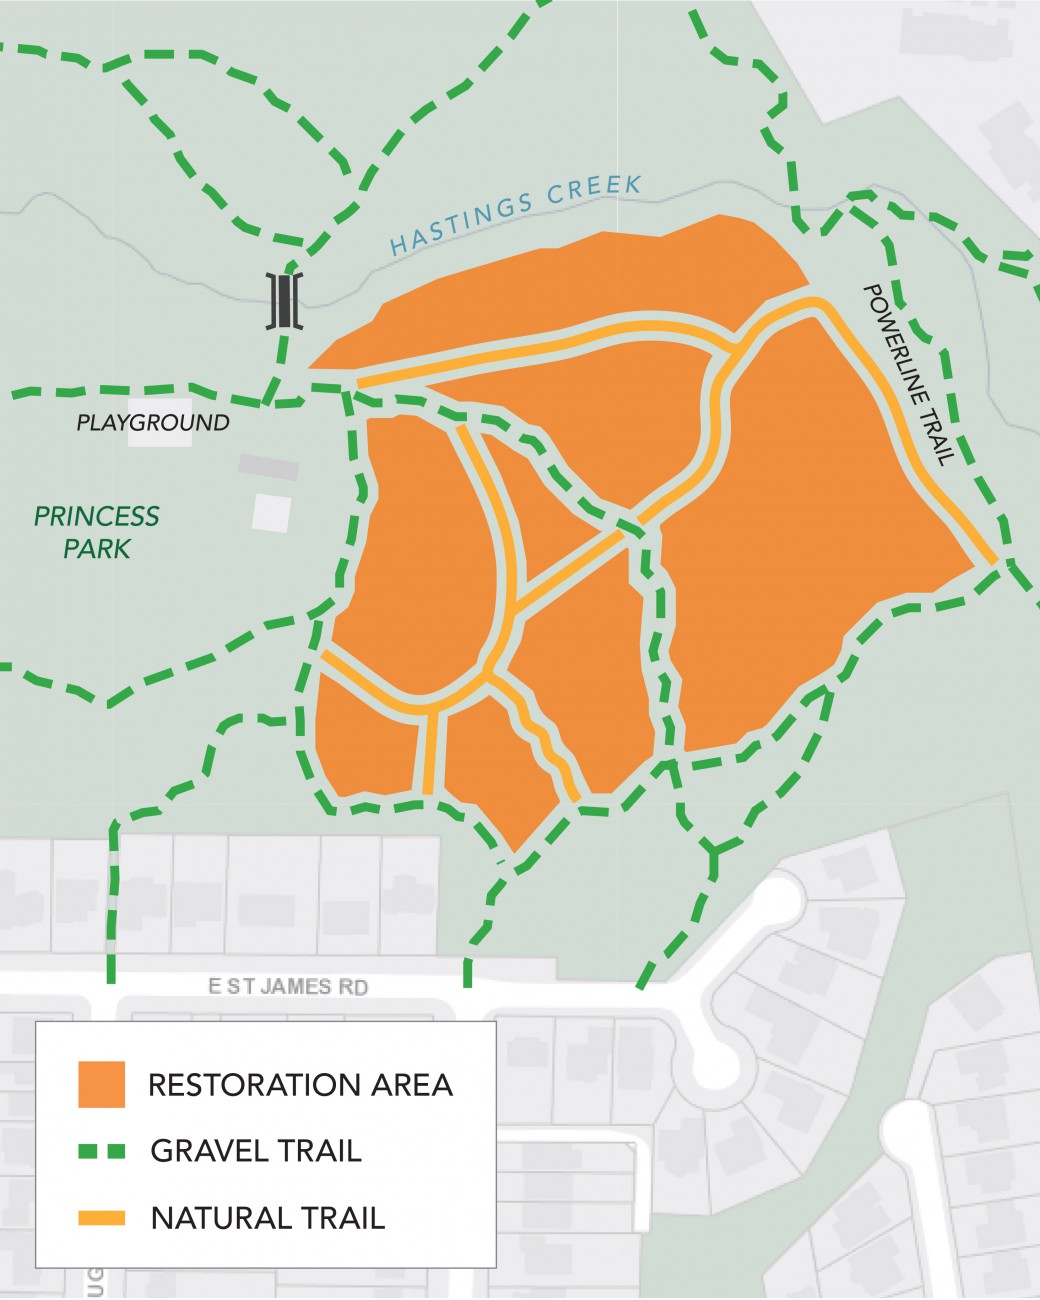 A map of Princess Park that denotes the restoration area in orange, a gravel path with green check line, and natural trail with a solid orange line.